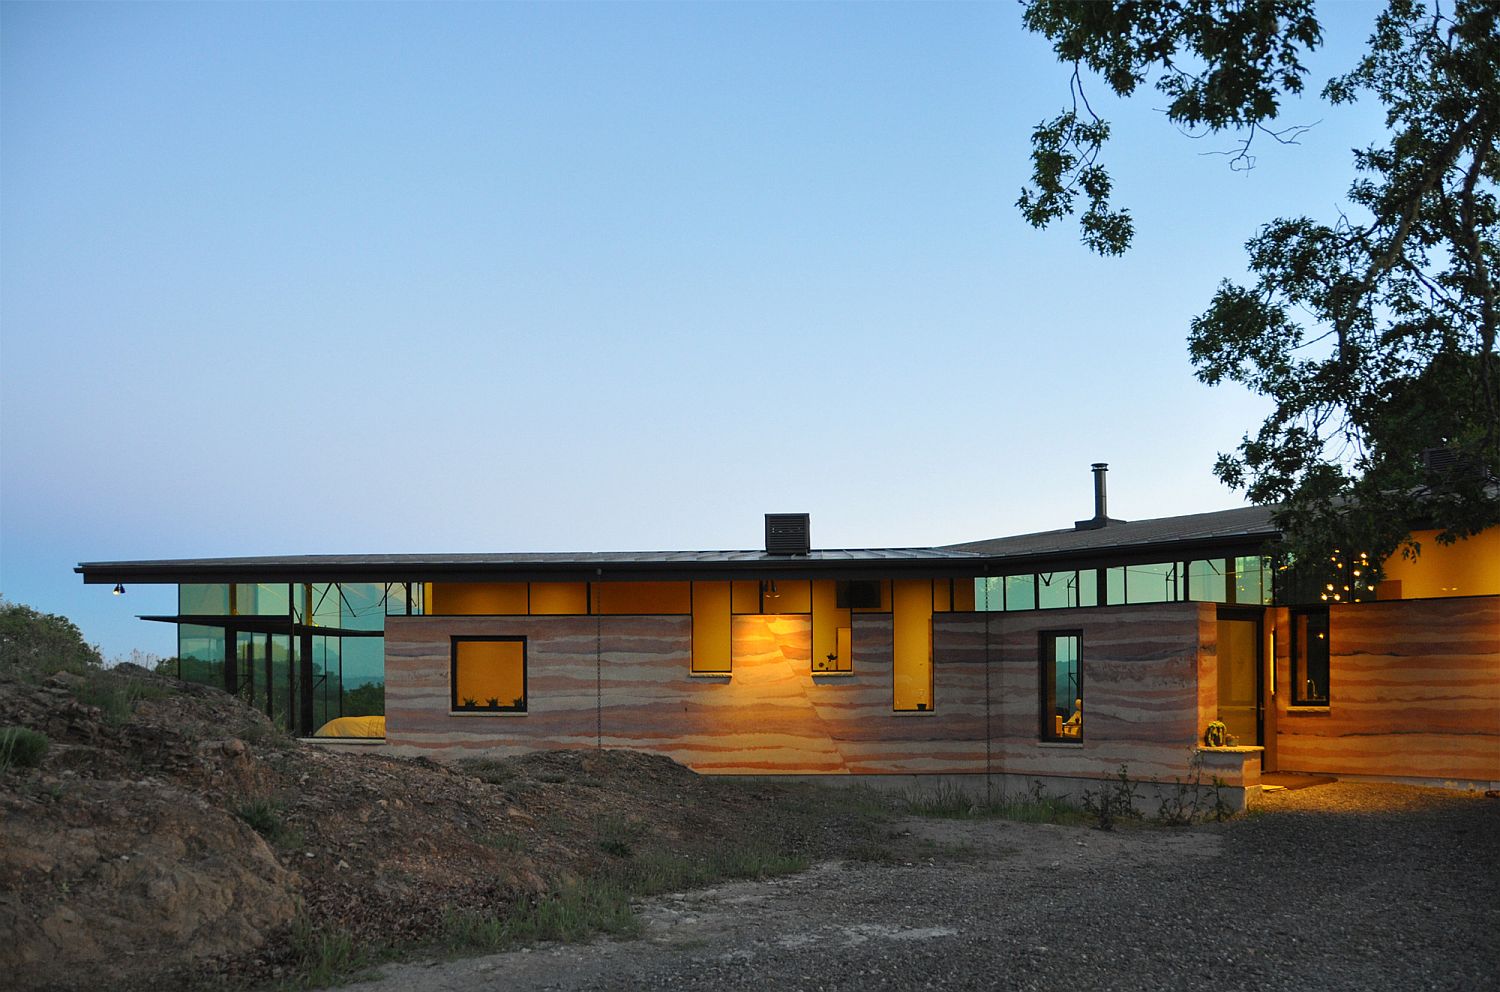 Simple, unassuming form and green energy shape smart Californian home